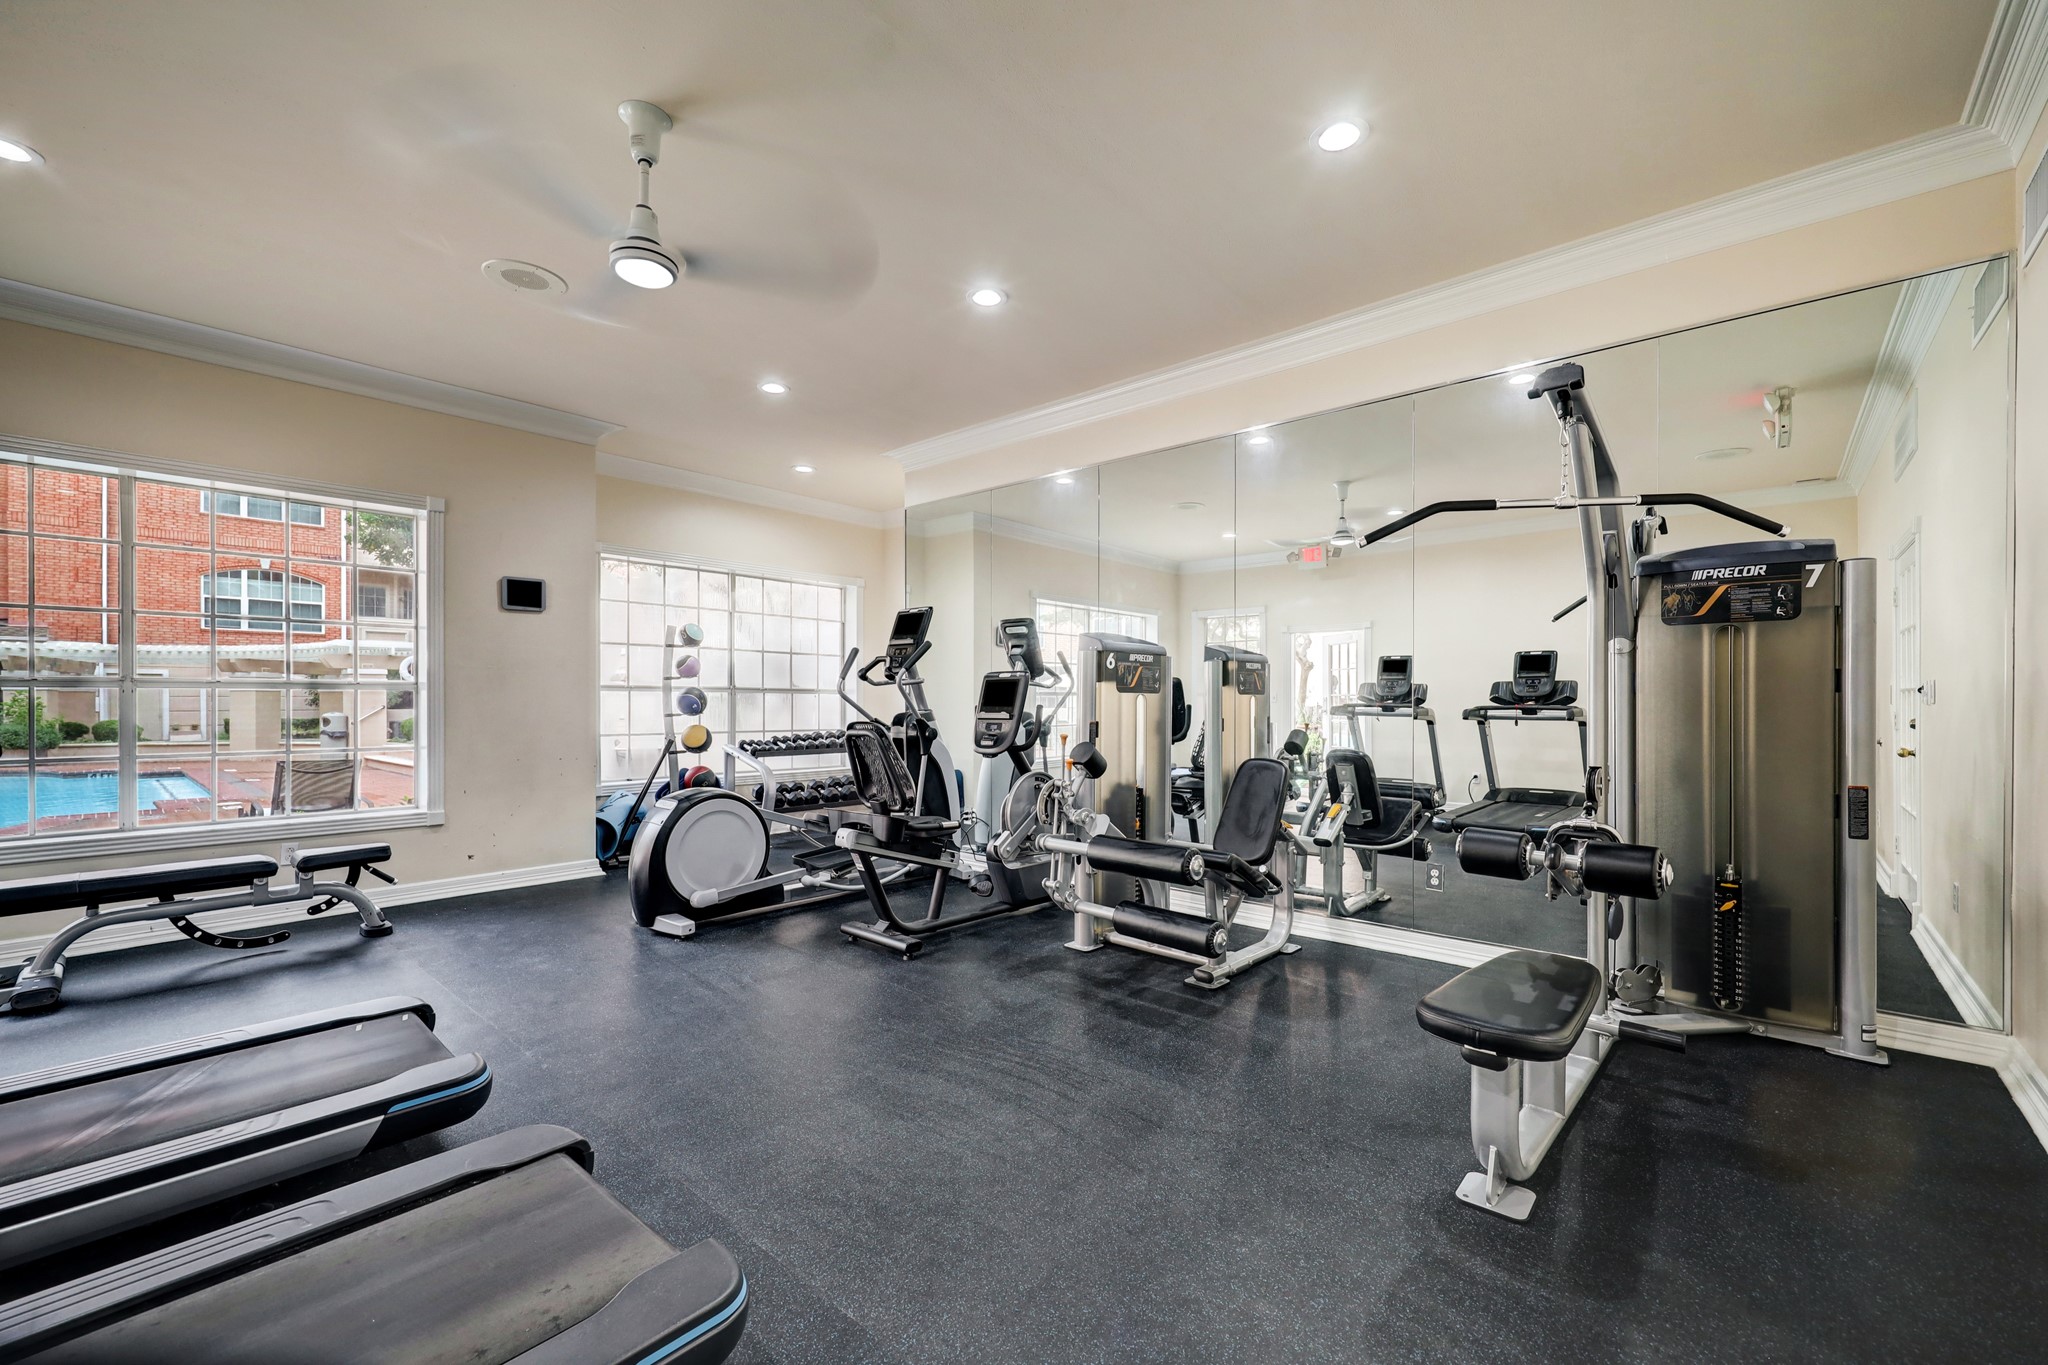 Exercise room has access from the pool also.